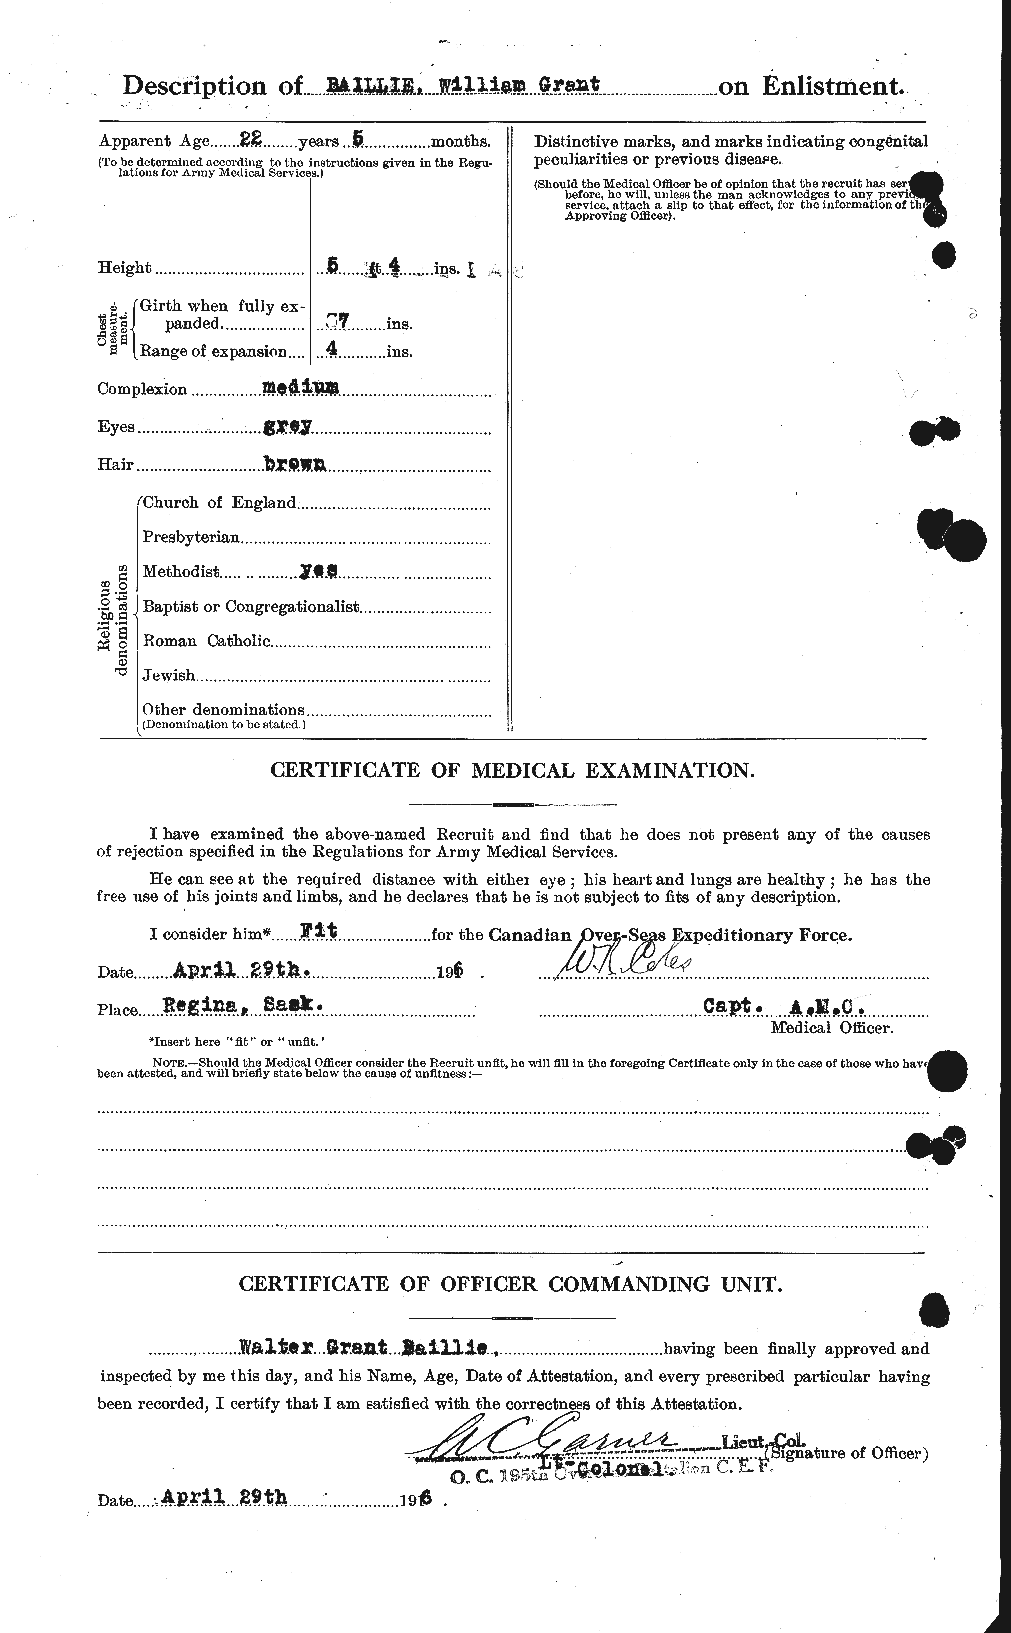 Personnel Records of the First World War - CEF 226208b